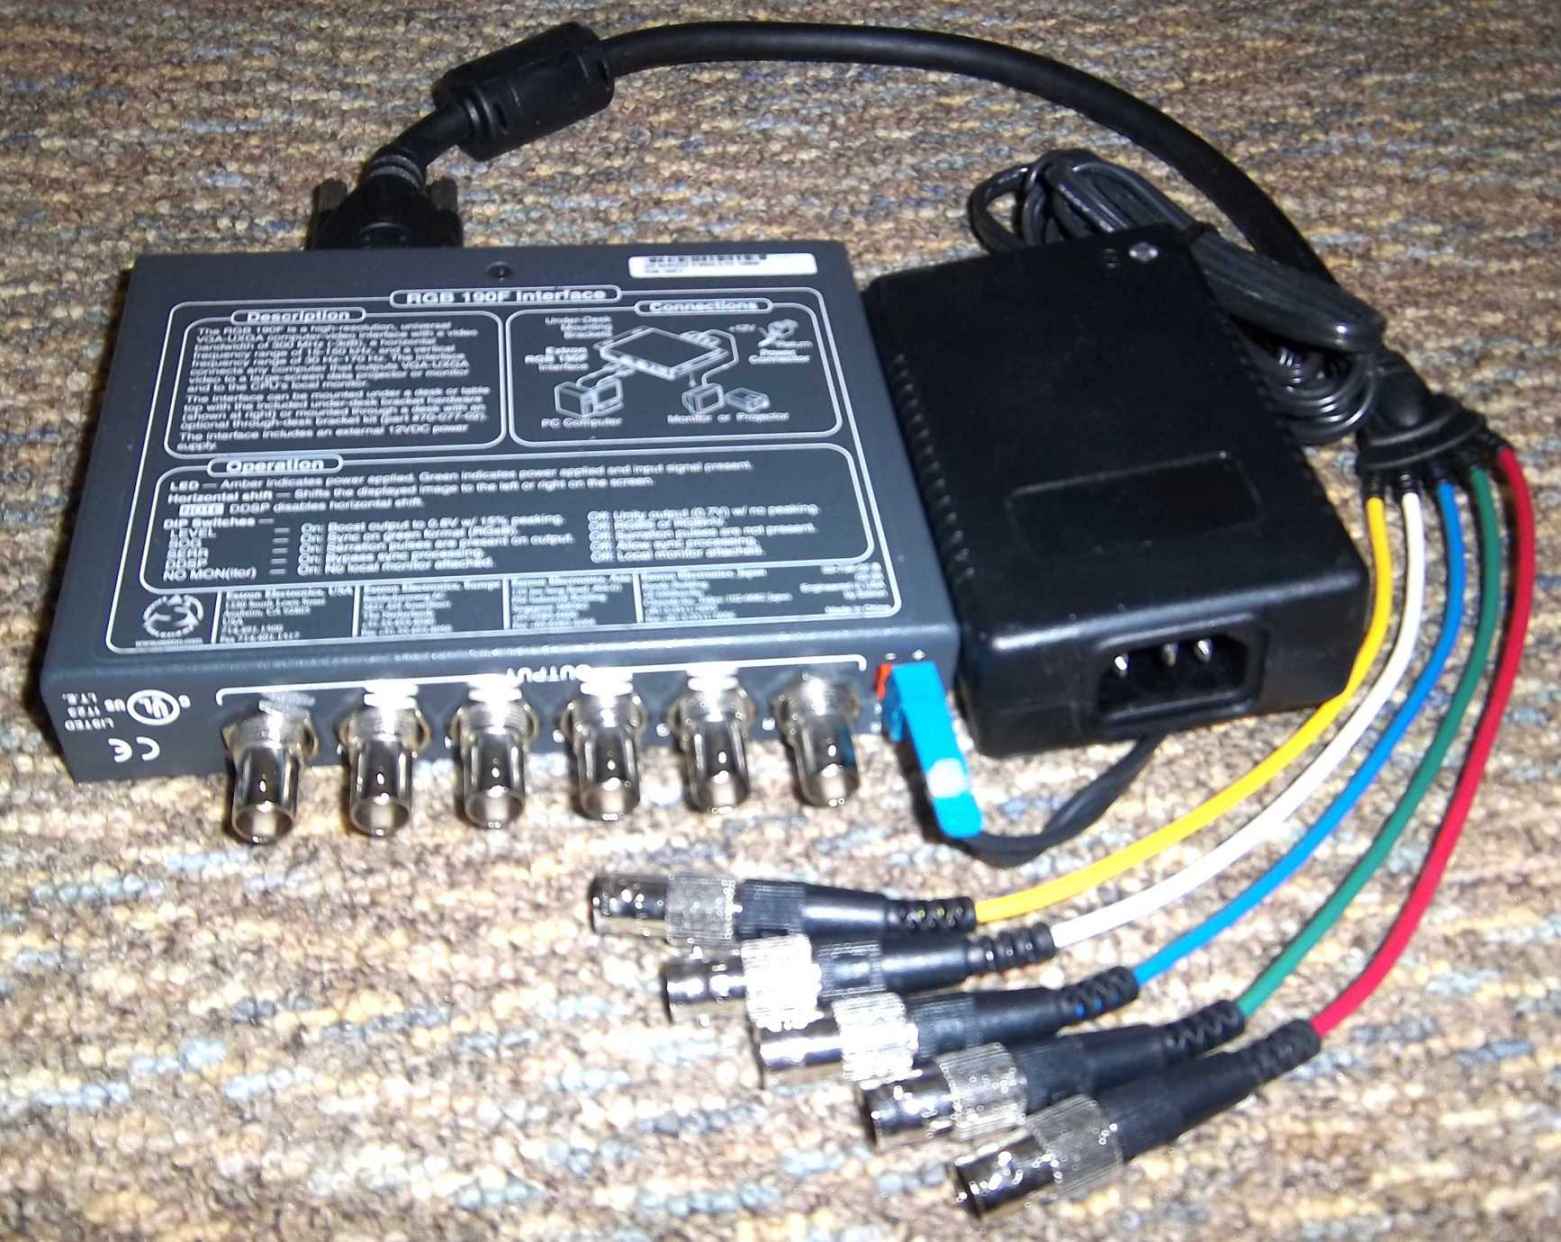 Extron RGB190F anolog computer video Interface